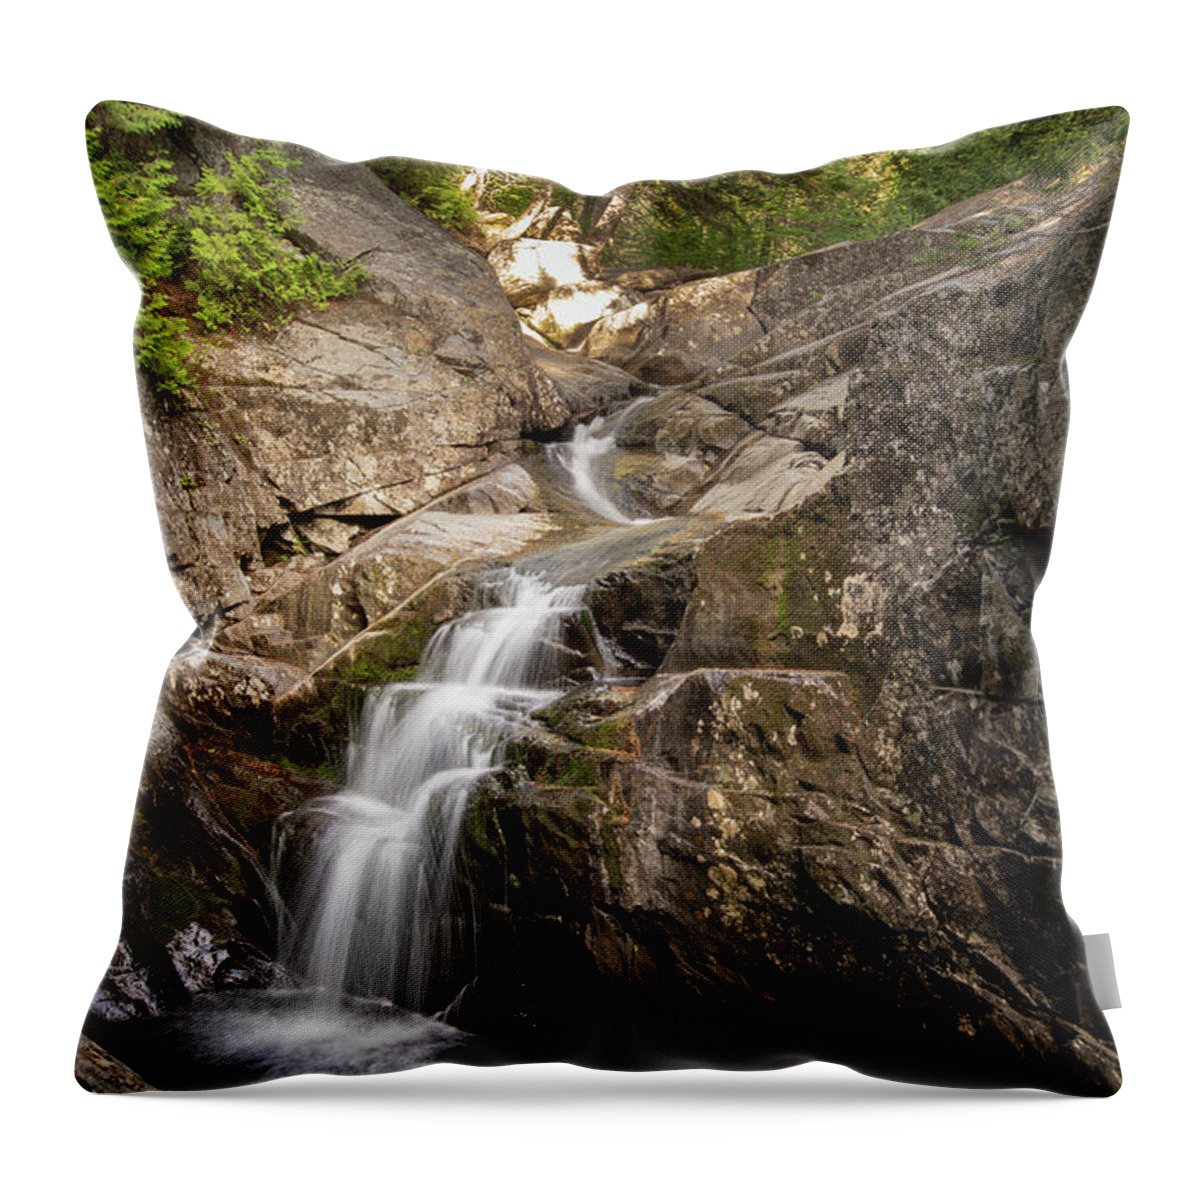 Bolders Throw Pillow featuring the photograph Cascade Stream Gorge Trail 5 by Dimitry Papkov